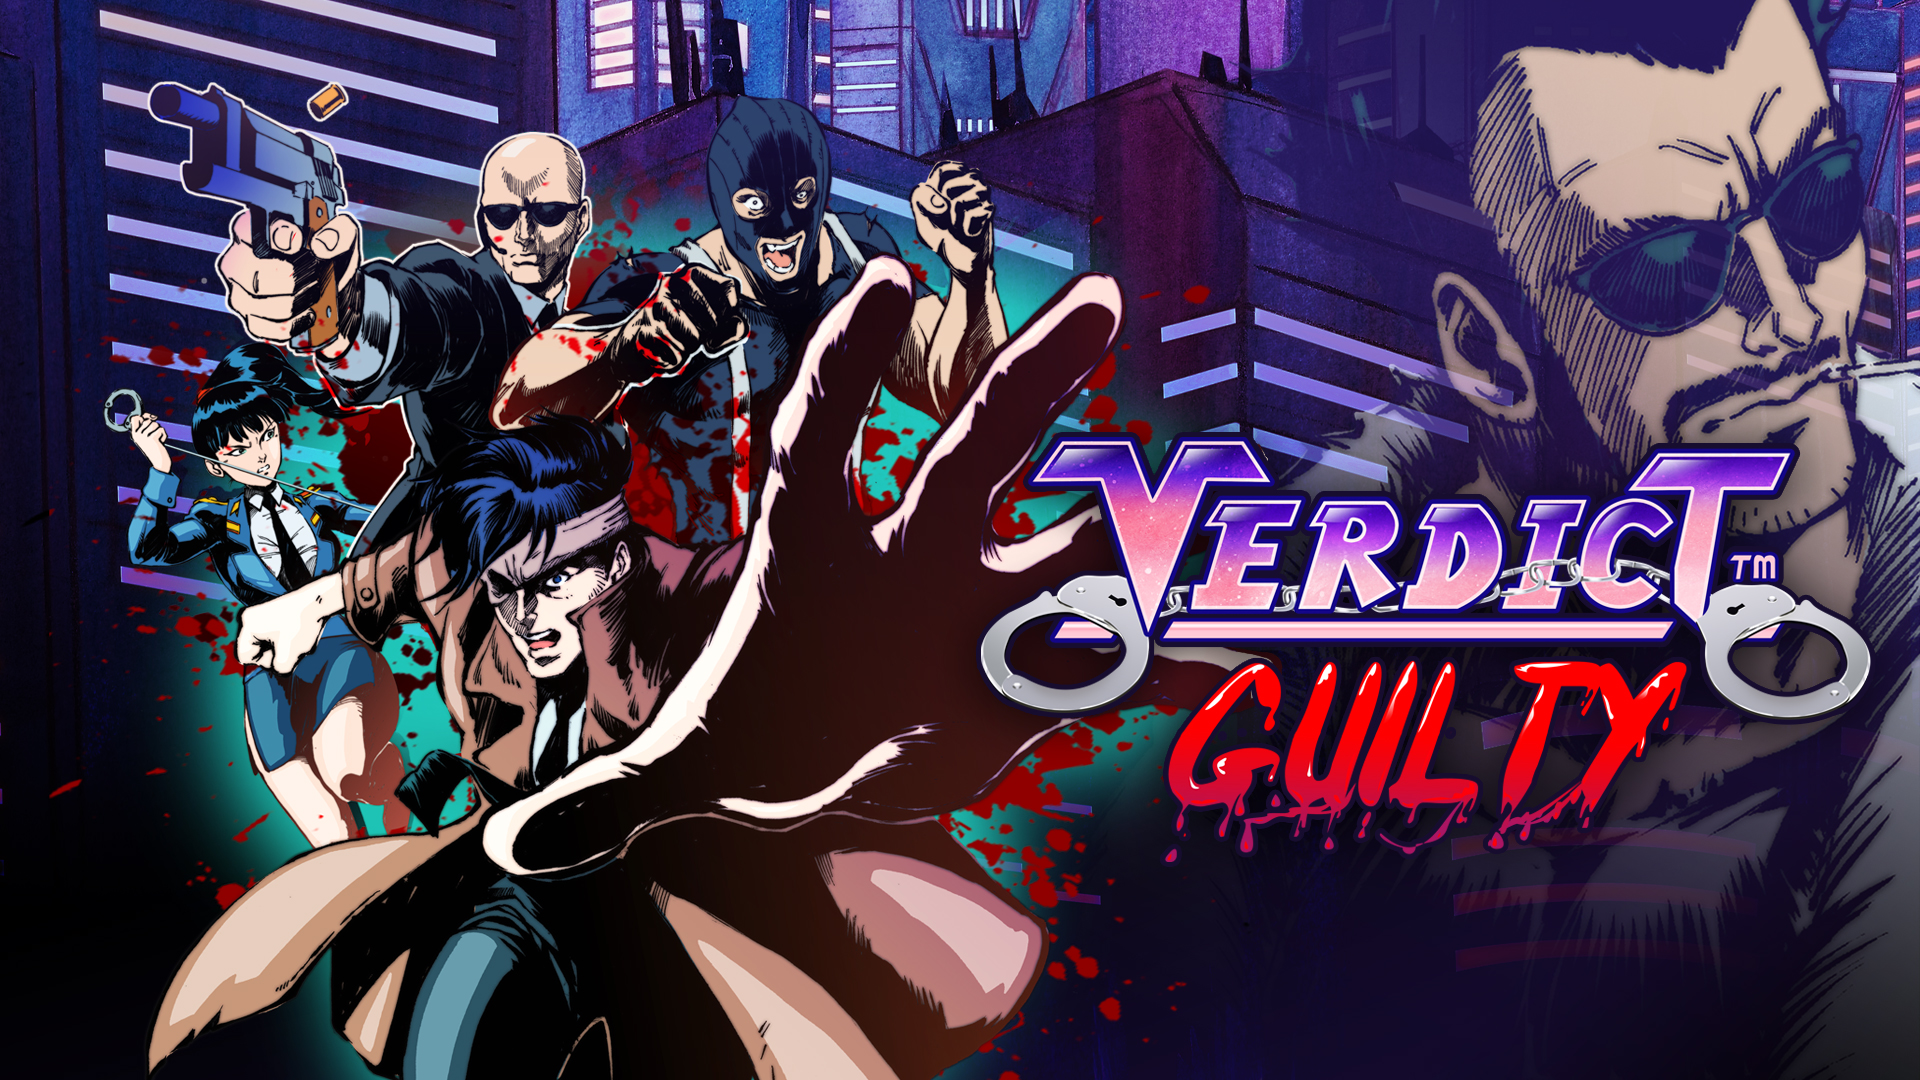 #
      90s style arcade fighting game Verdict Guilty coming to Switch on February 16, PS4 and Xbox One soon